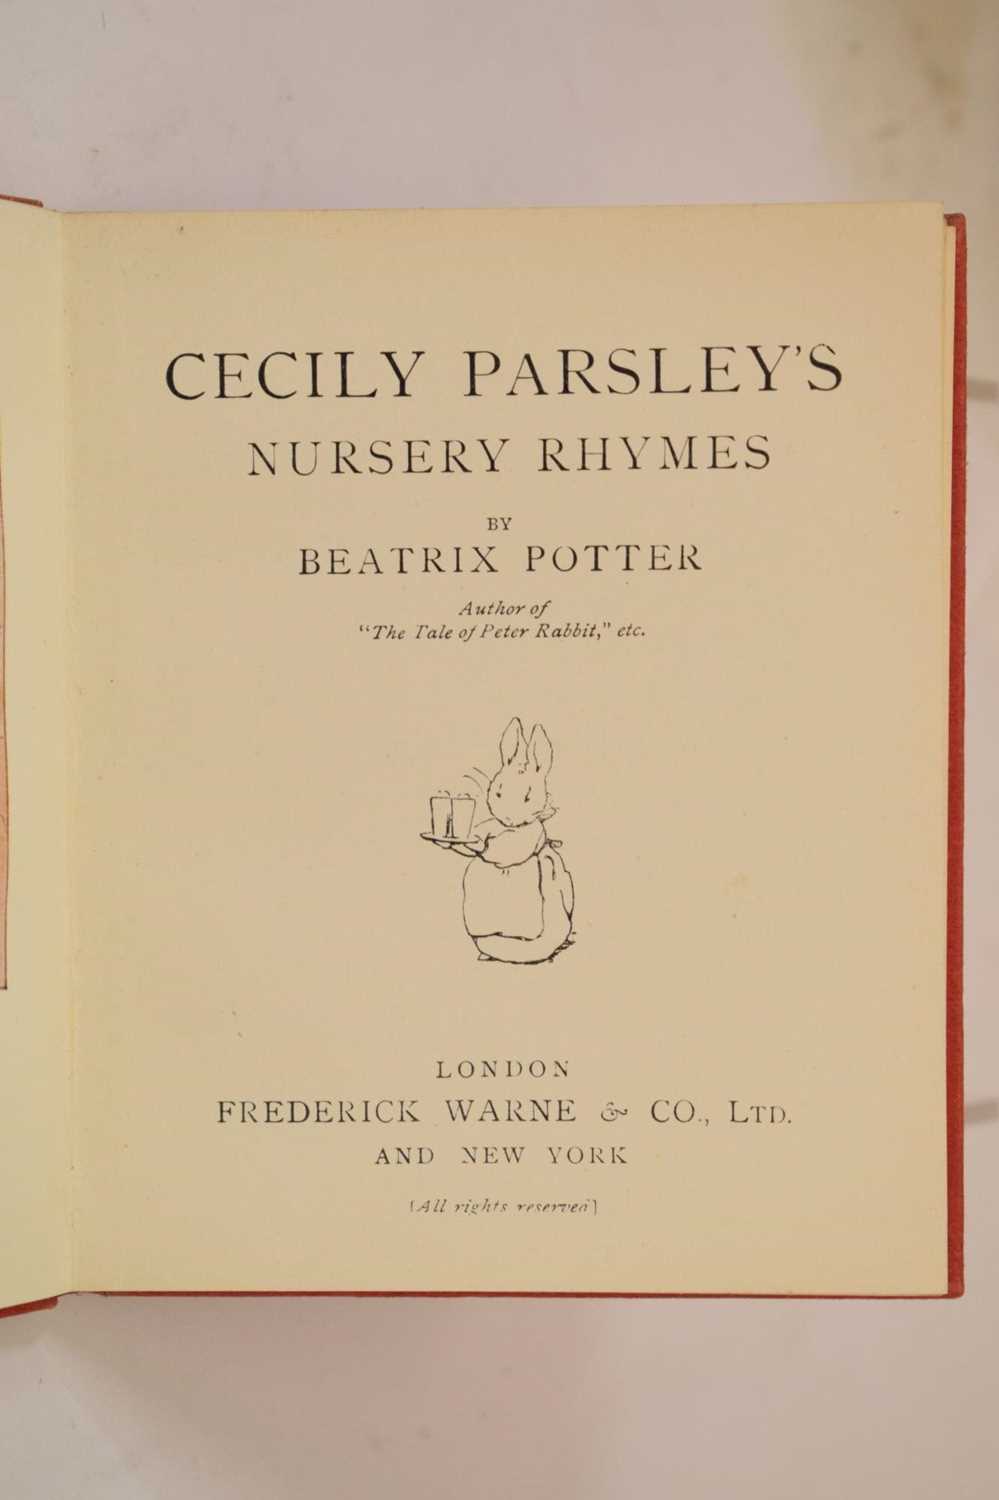 Potter, Beatrix - 'Cecily Parsley's Nursery Rhymes' - First edition - Image 24 of 37